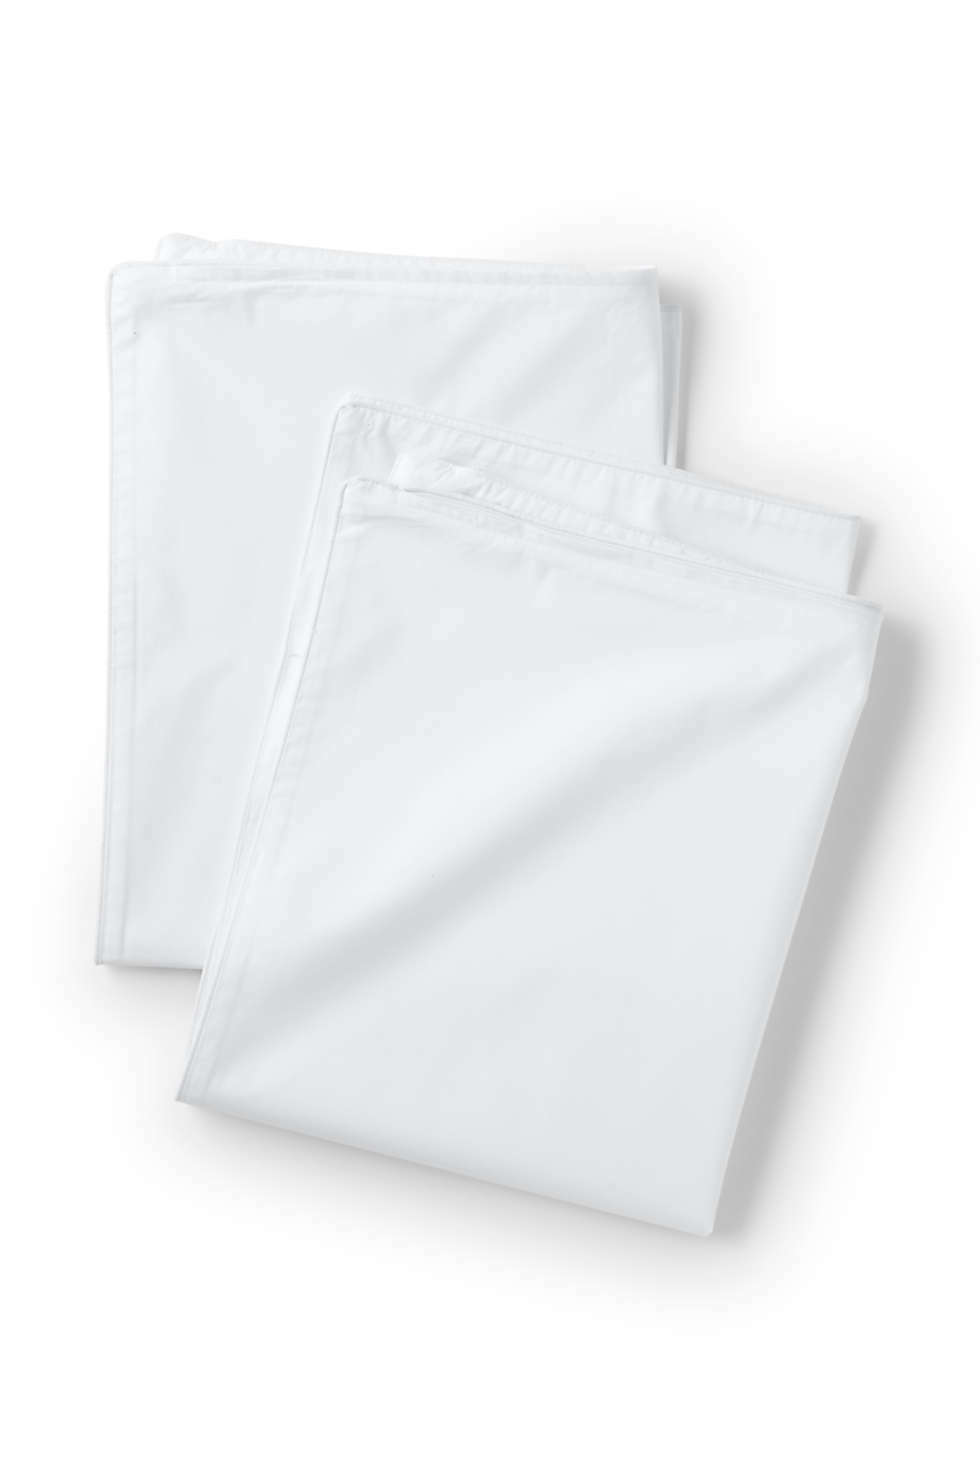 Set of 2 Queen Size Pillow Protector Cover Case White Zippered Cotton Polyester  Unbranded